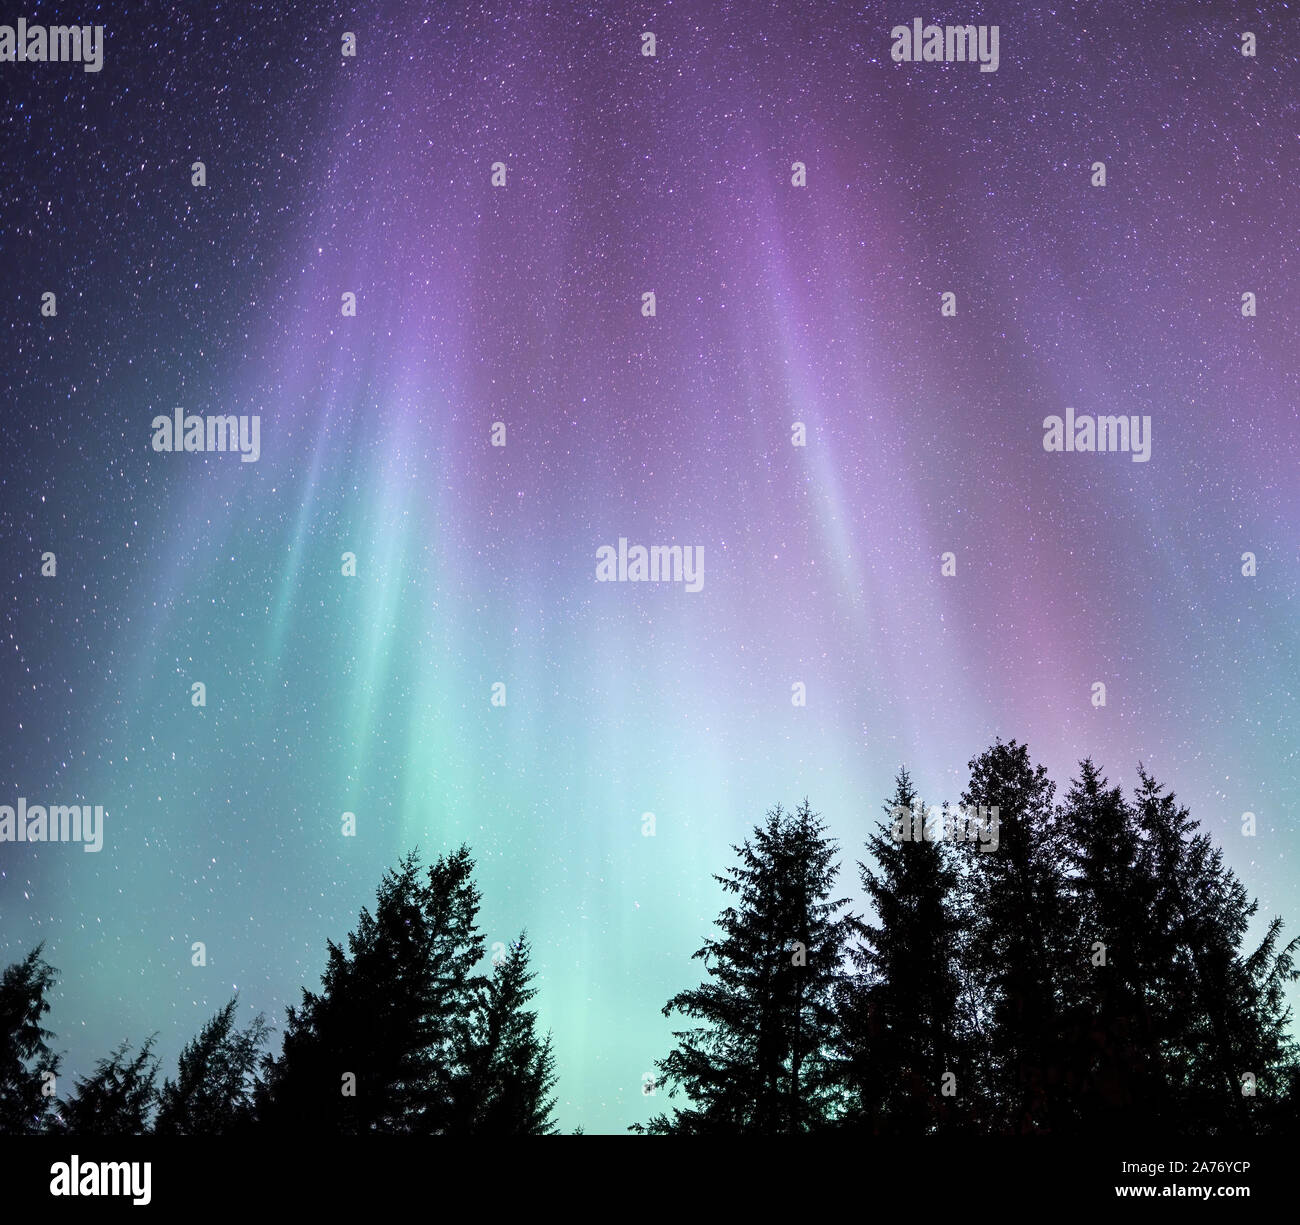 Beautiful Northern Lights Aurora Borealis With Purple And Green Streamers Over The Northern Woods Stock Photo Alamy